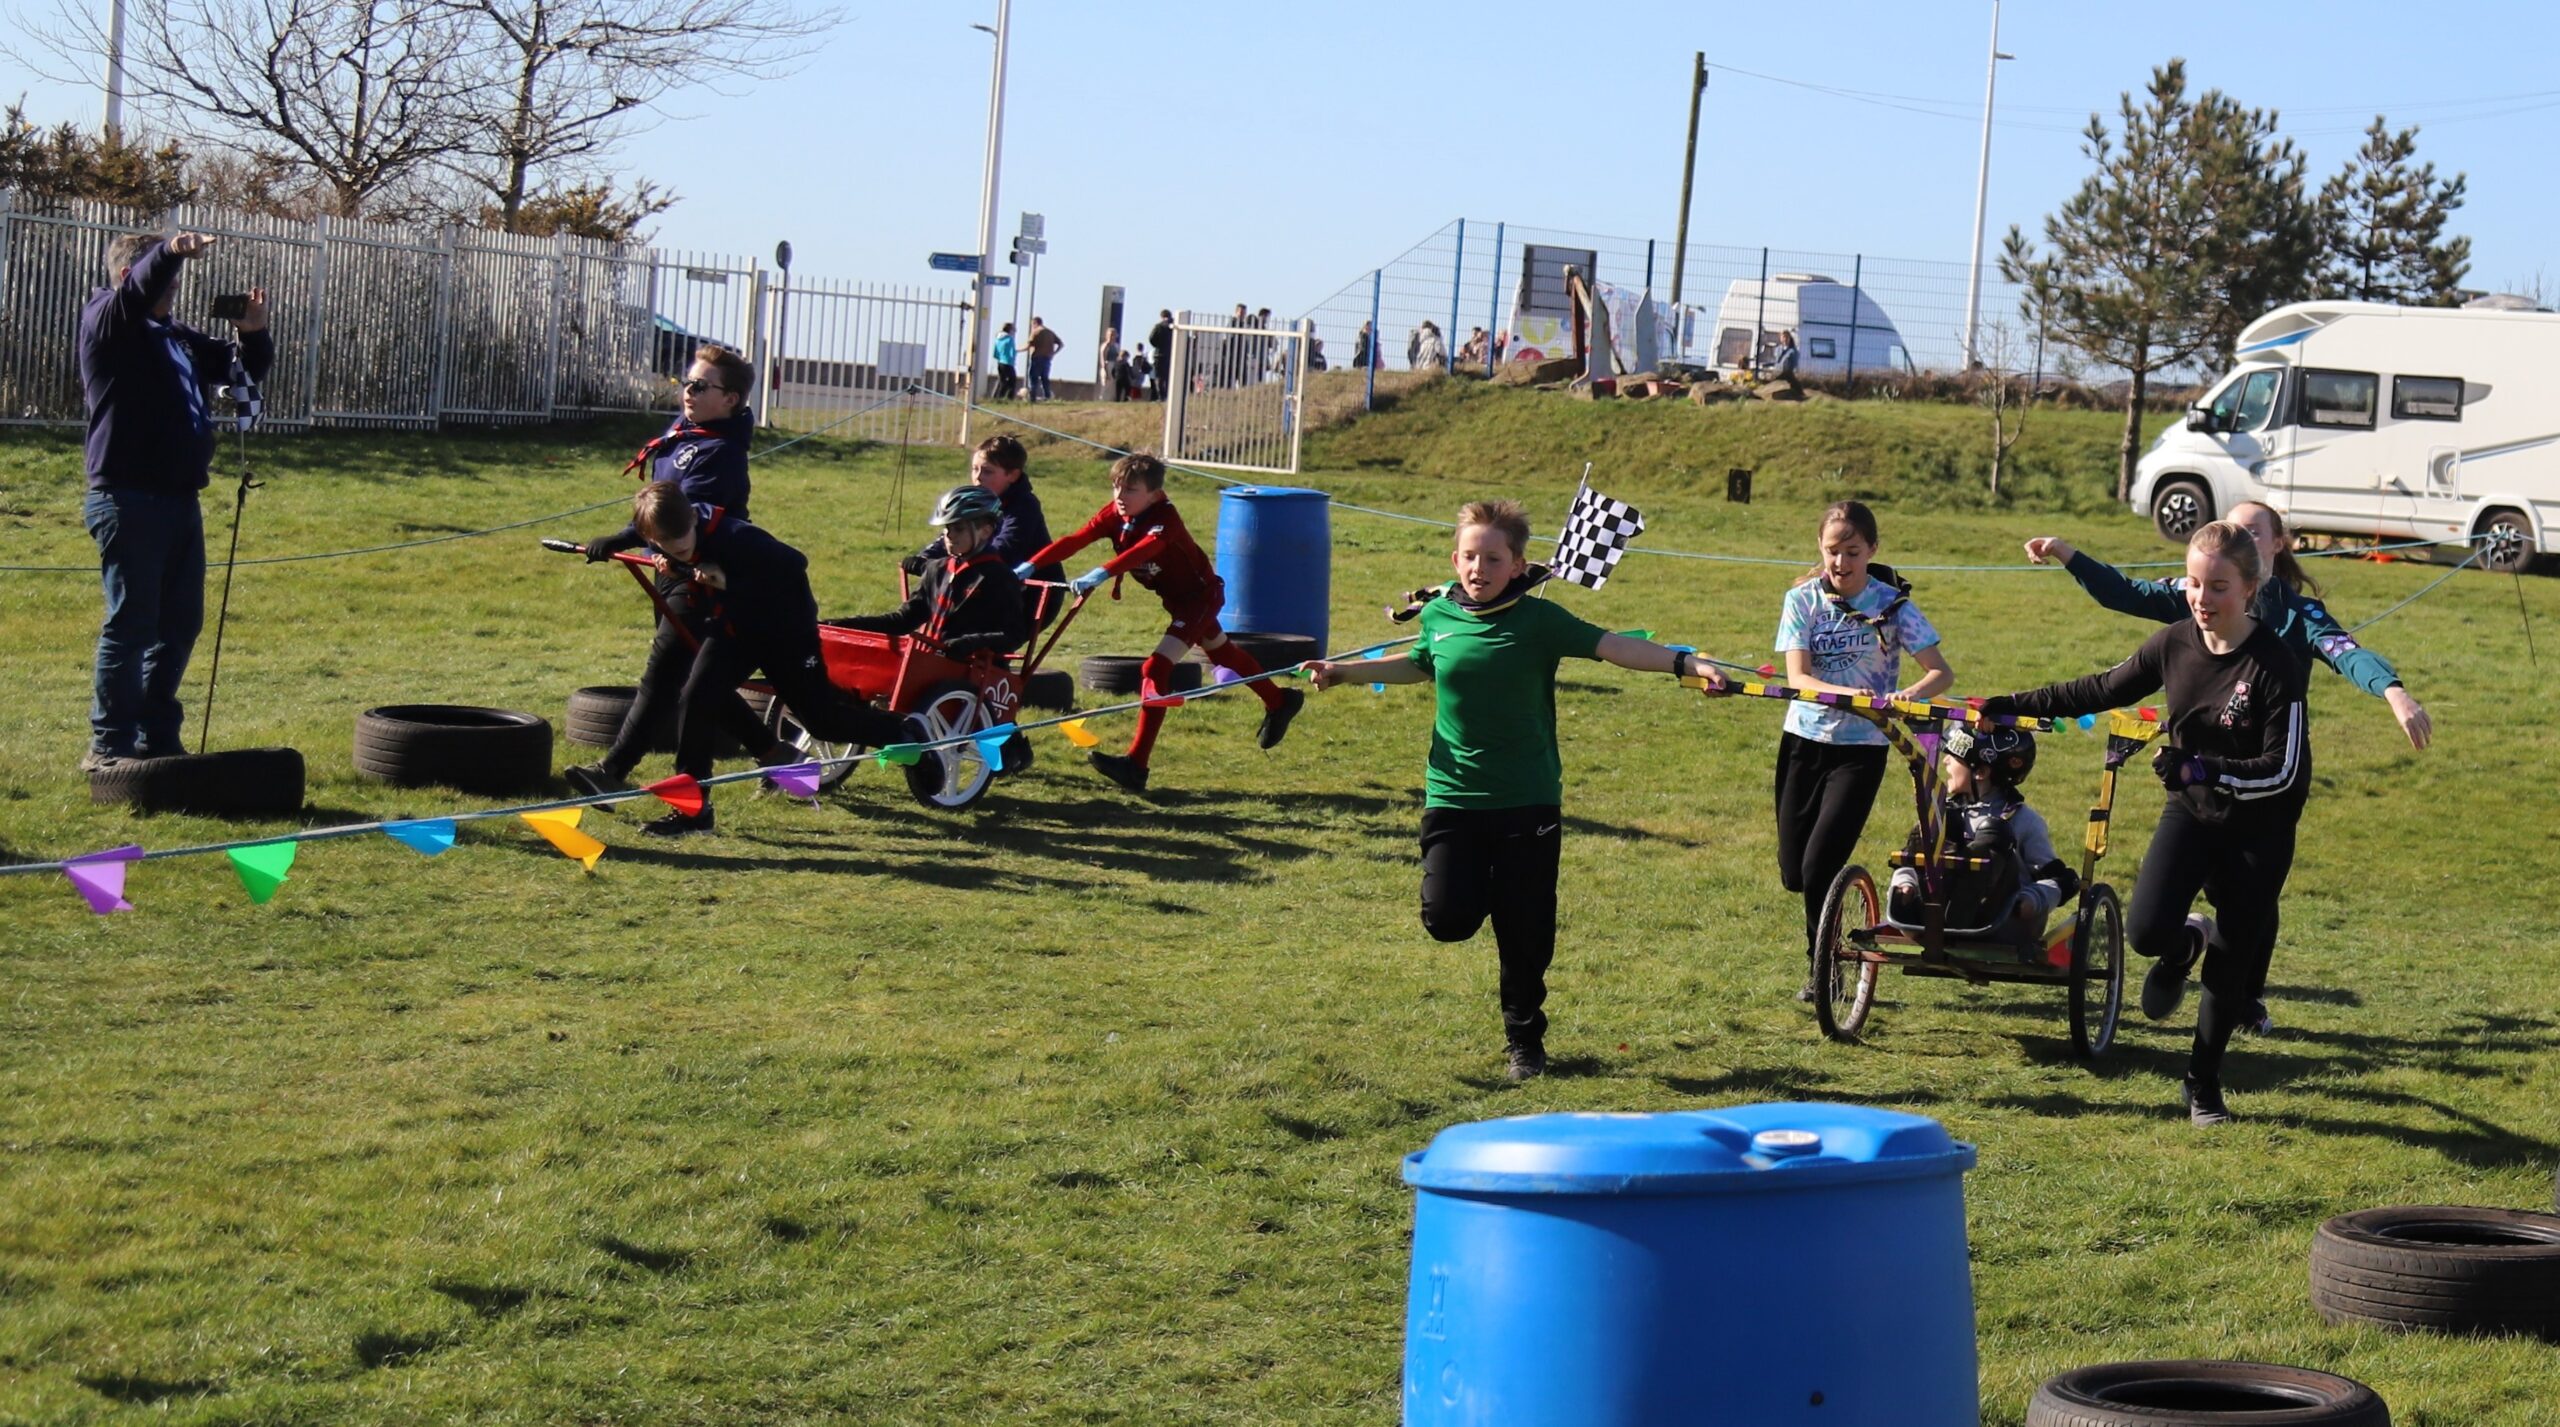 District Scout Chariot Racing & Tug ‘o’ War Competition  – March 2022